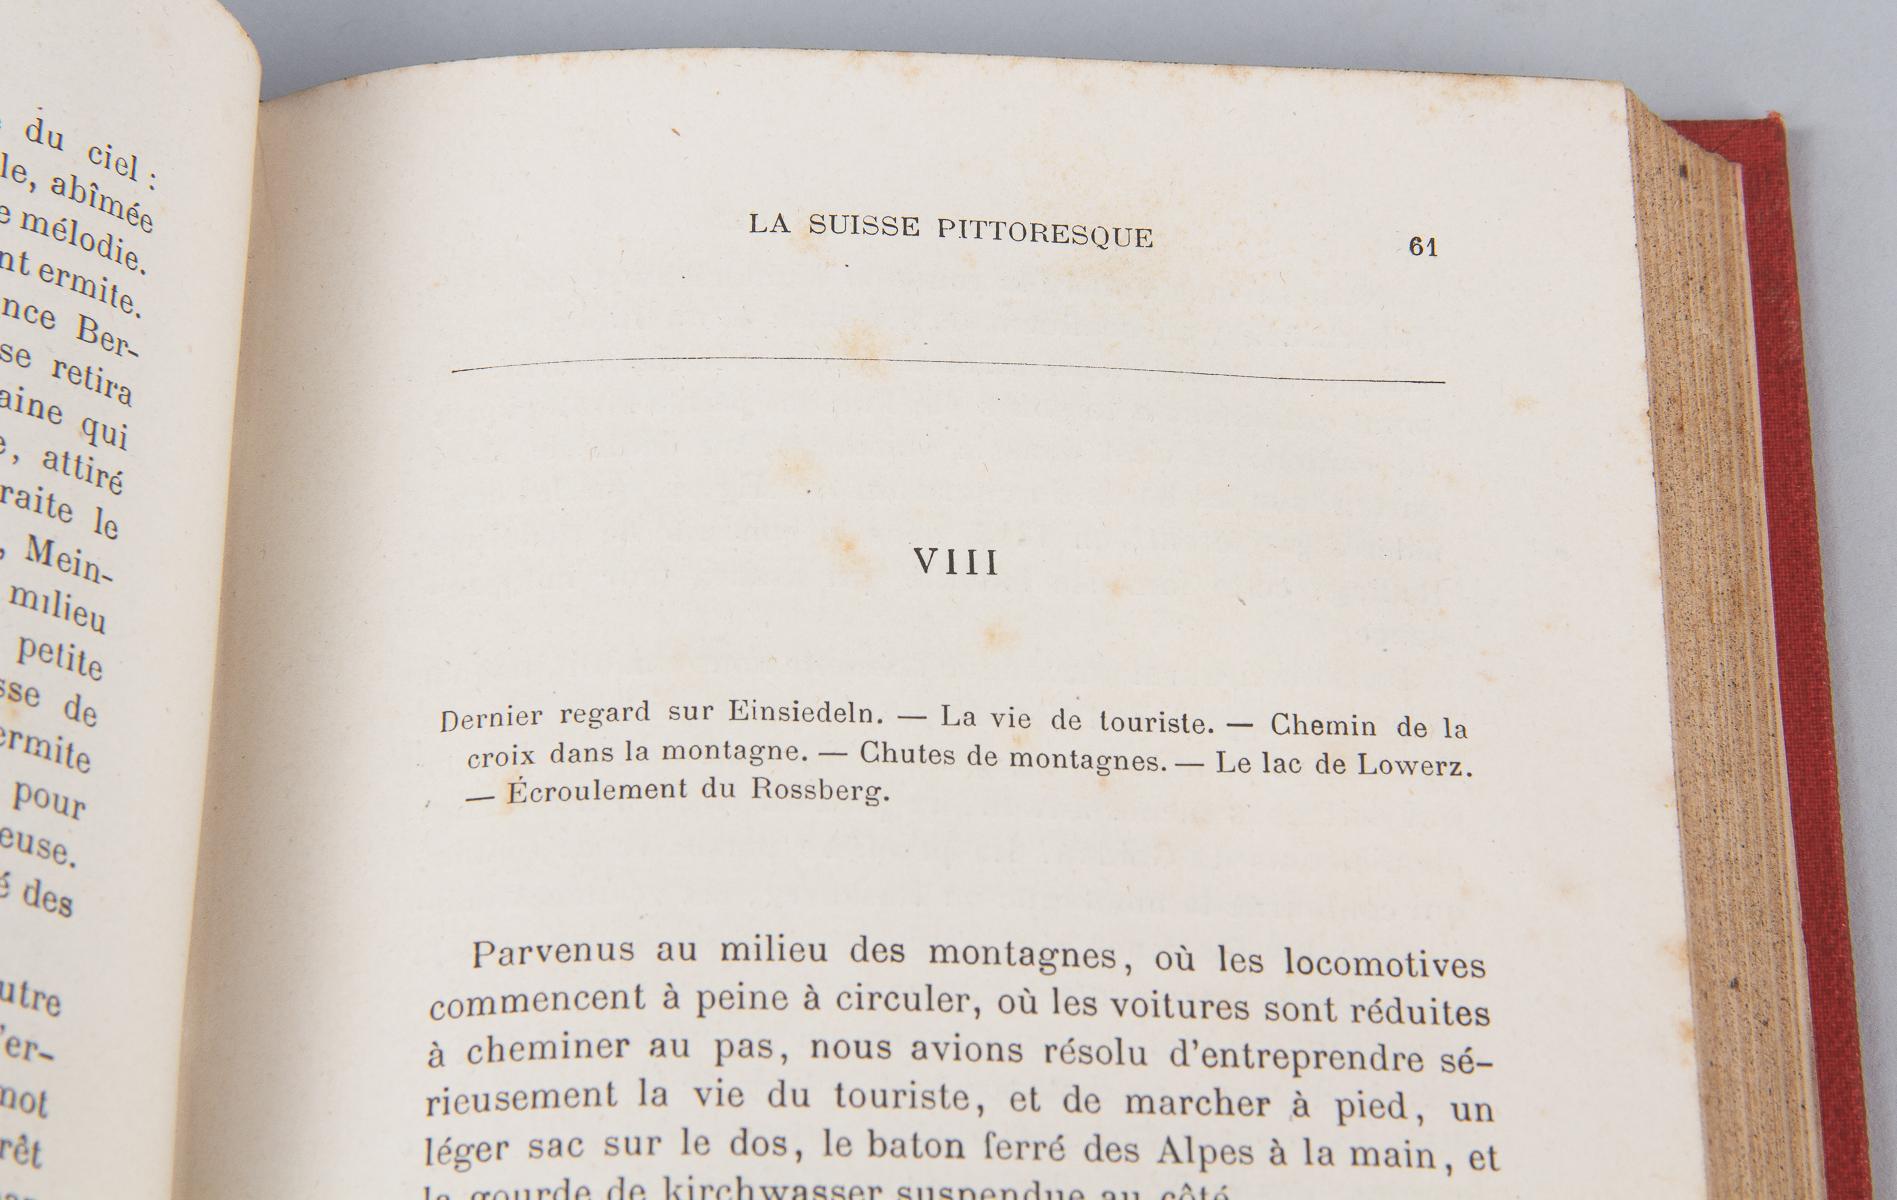 French Travel Guide Book La Suisse Pittoresque by Paul Fribourg, 1881 8